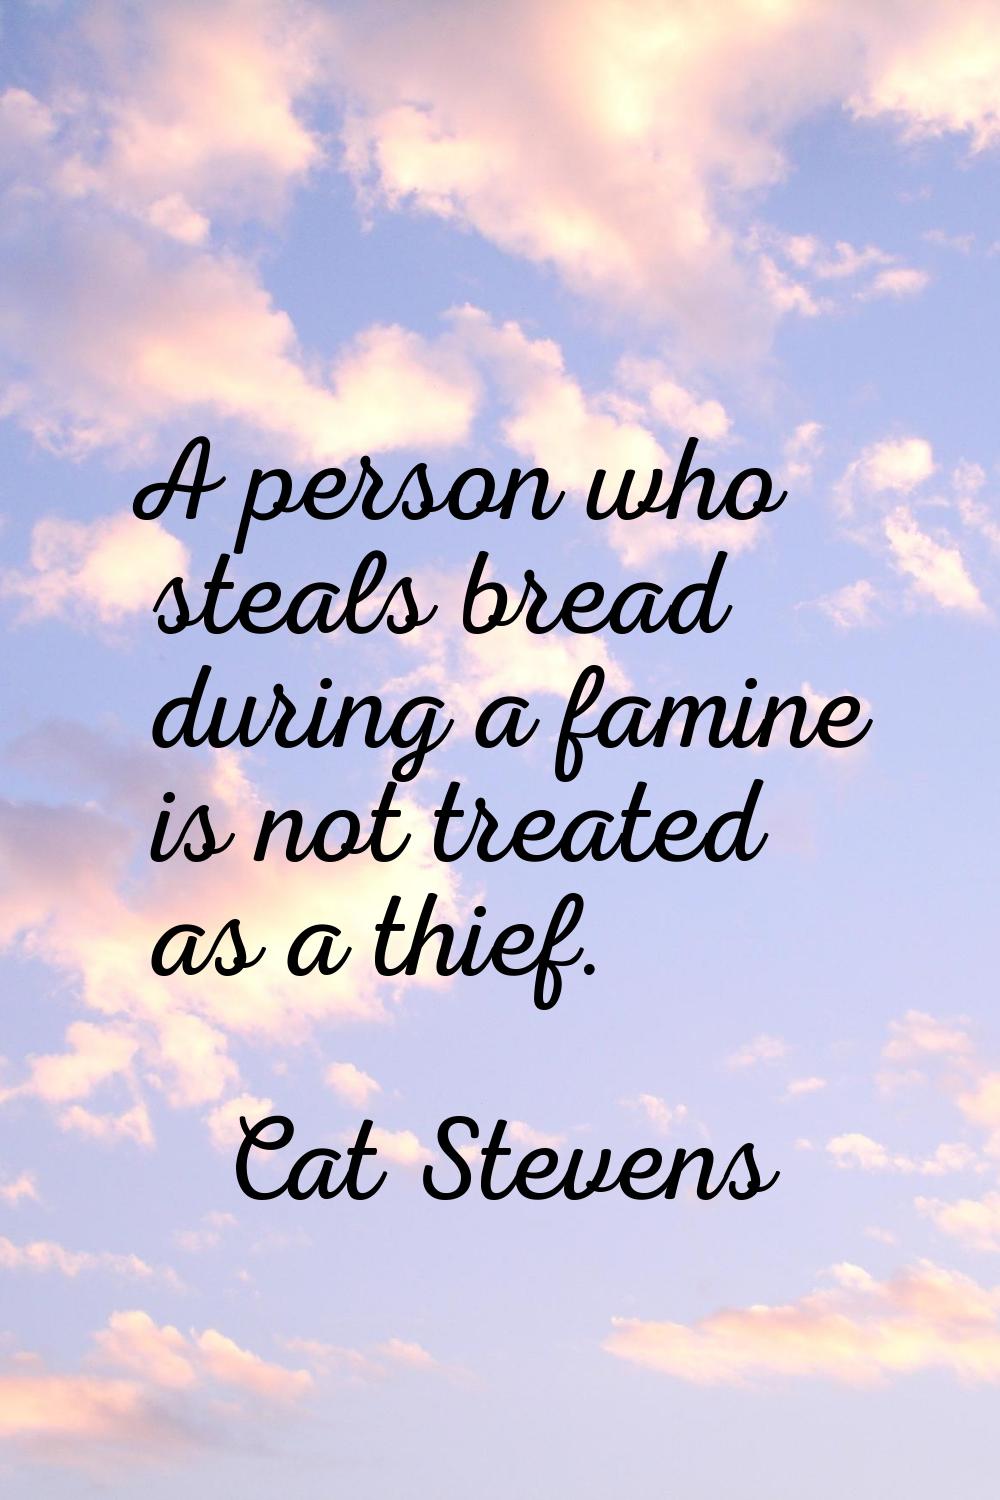 A person who steals bread during a famine is not treated as a thief.